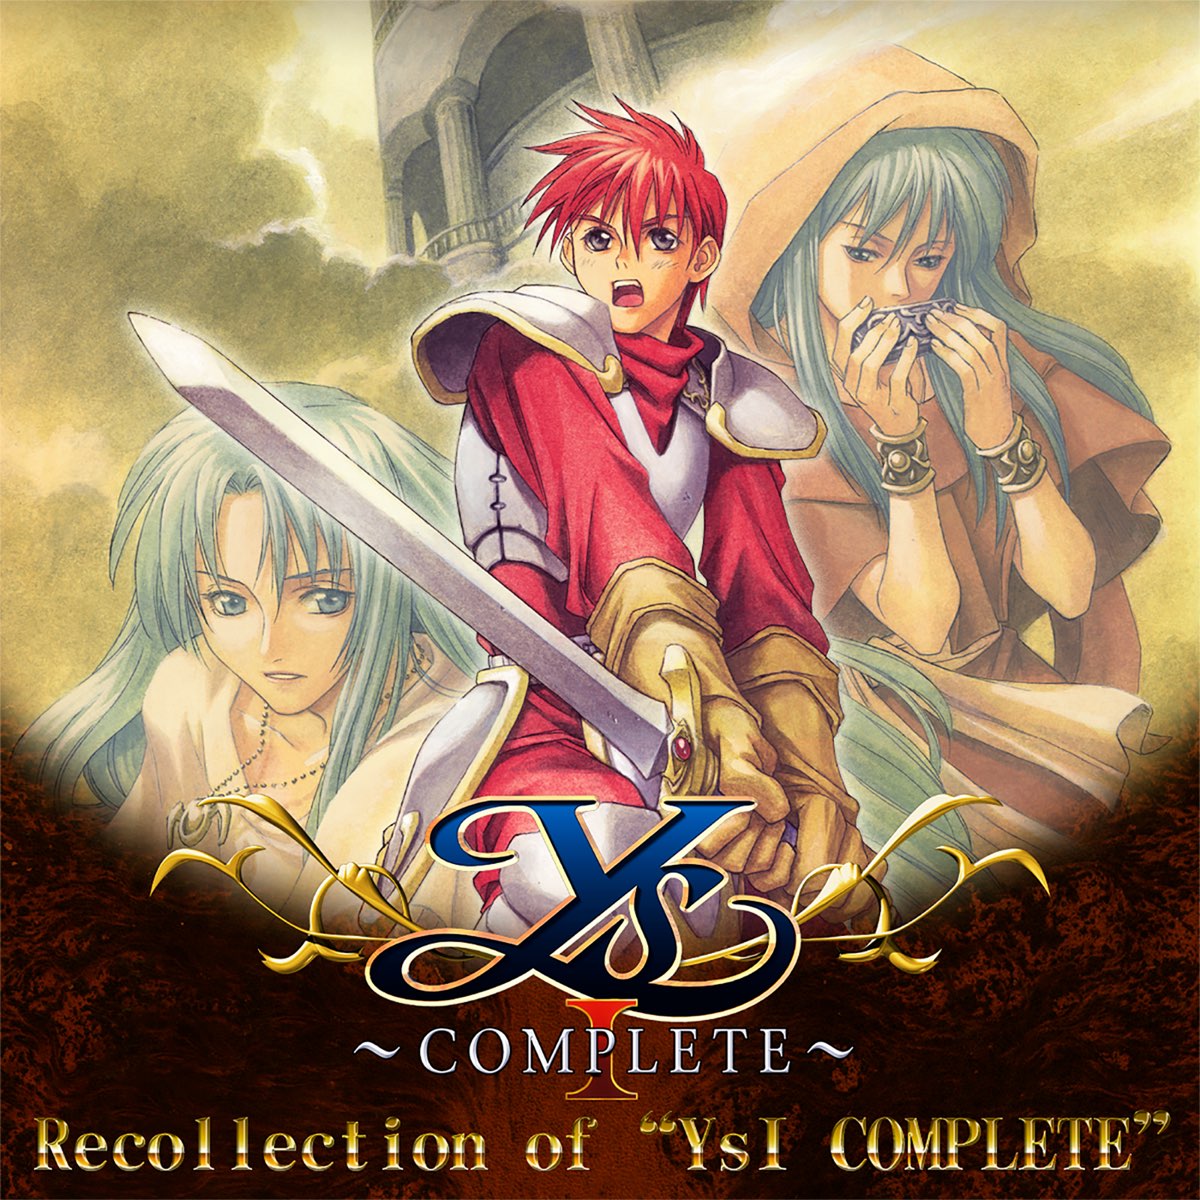 Falcom Sound Team Jdk Recollection Of Ys 1 Complete By Falcom Sound Team Jdk Album Artwork Cover My Tunes